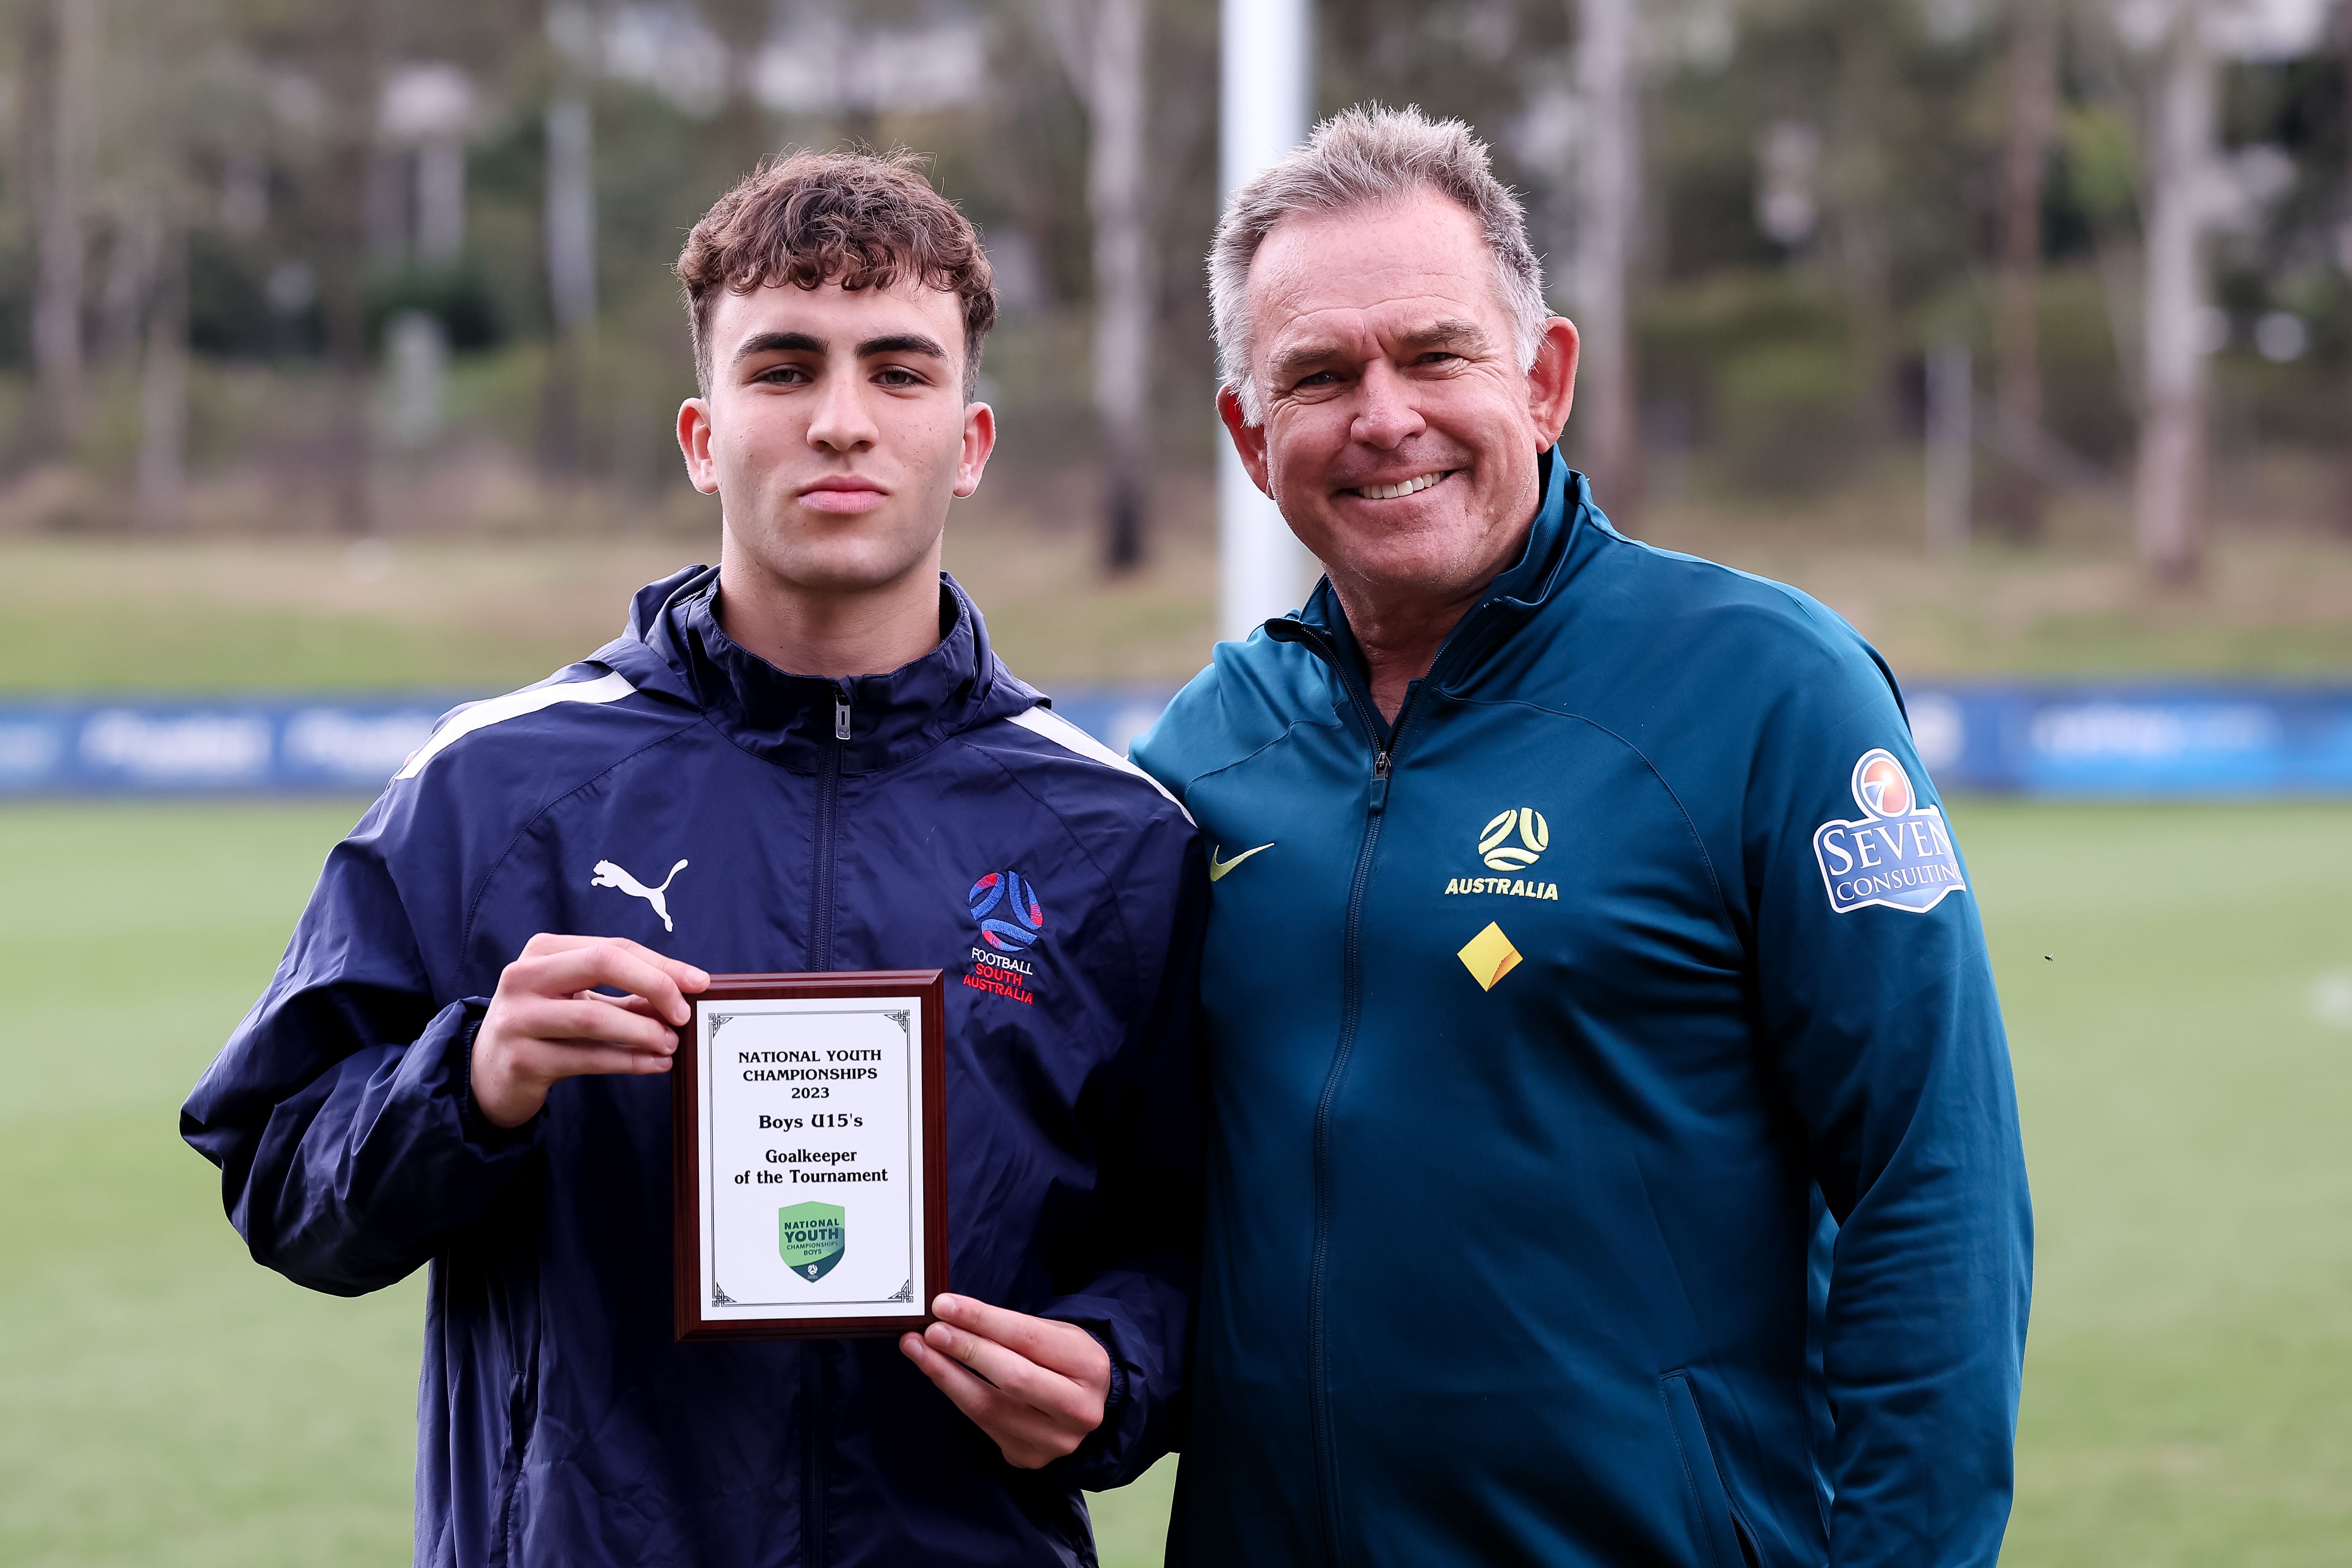 Under 15 Goalkeeper of the Tournament Noah Ellul from Football South Australia with Tony Franken  